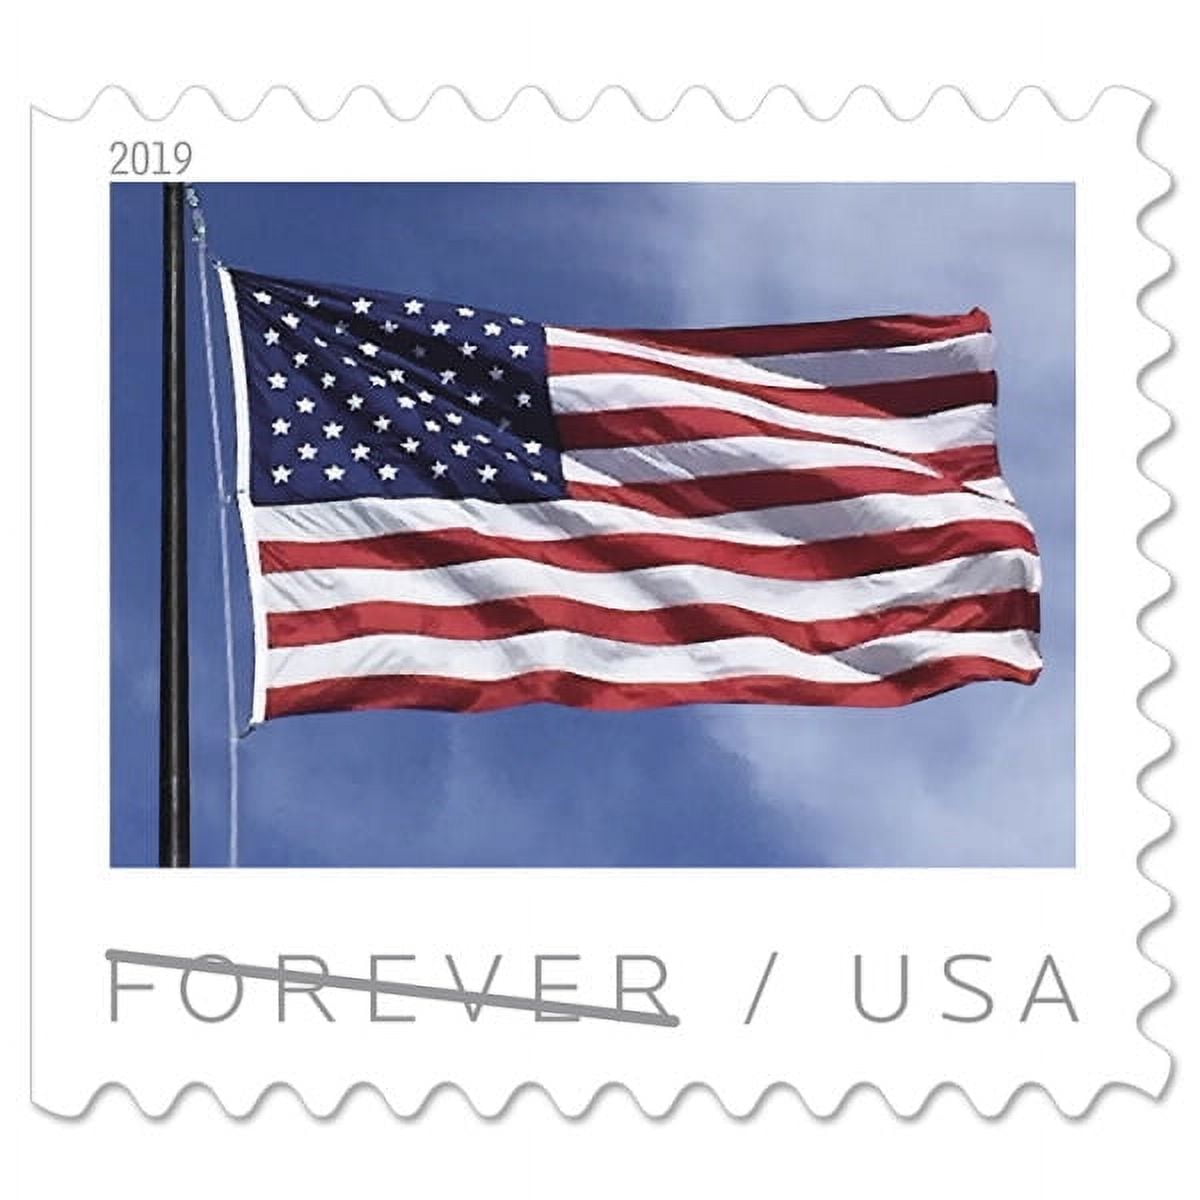 Star Ribbon 100 Forever First Class Postage Stamps